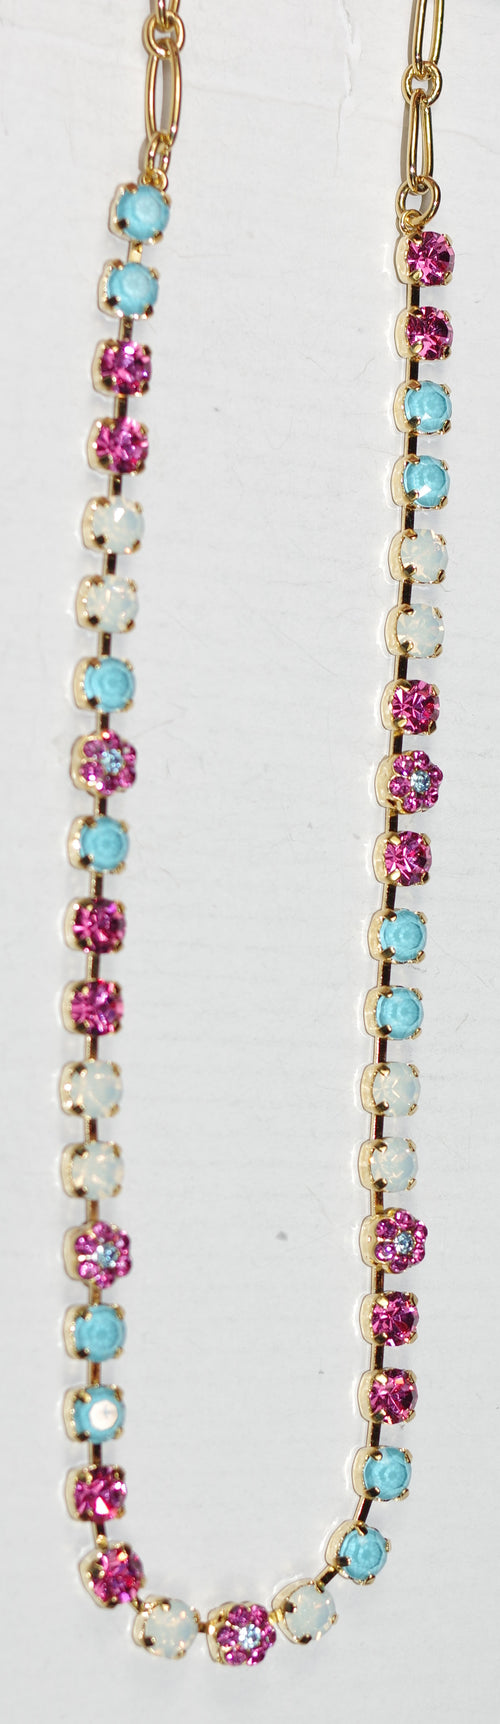 MARIANA NECKLACE BANANA SPLIT: white, pink, blue 1/4" stones in yellow gold setting, 18" adjustable chain